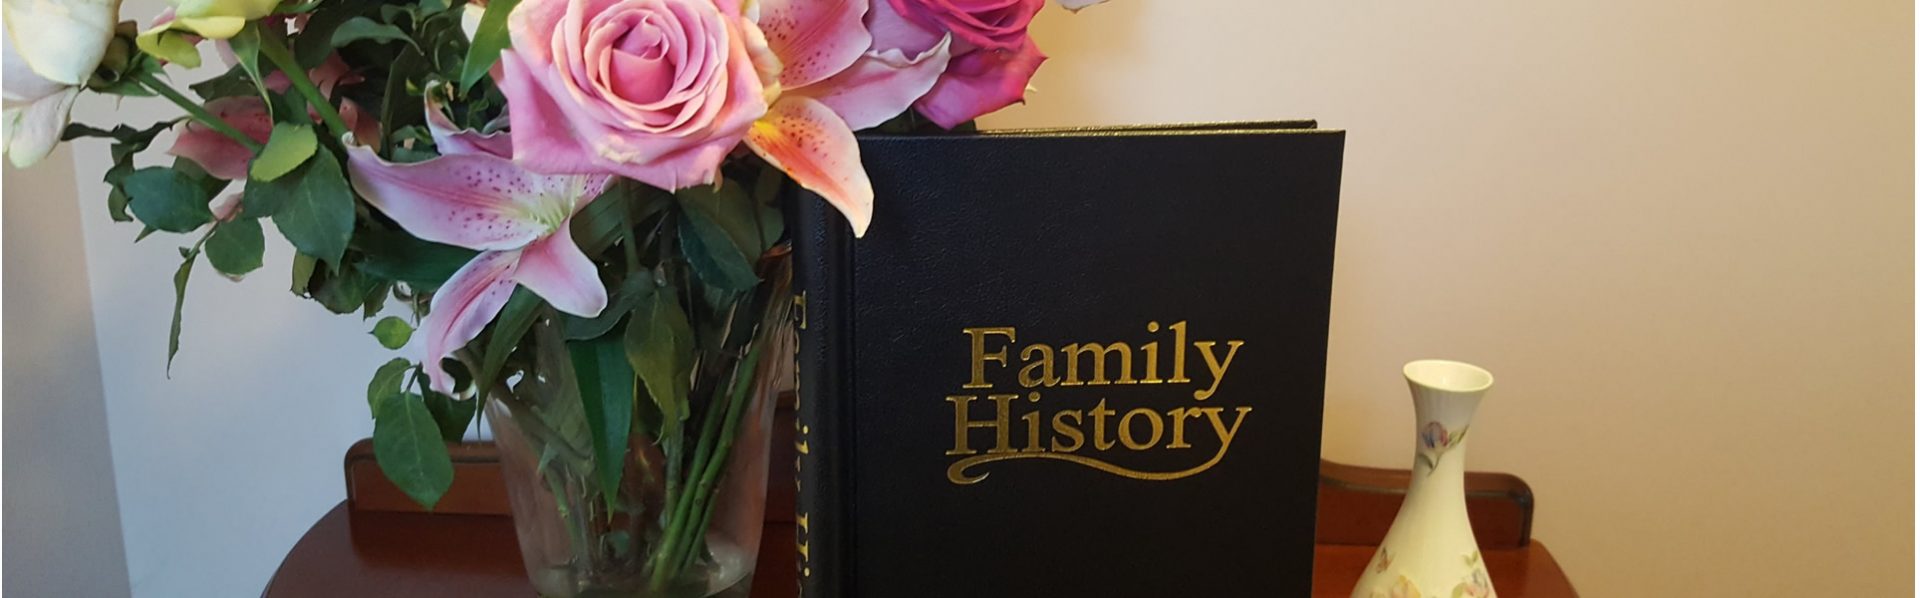 Family Hostory Binder and flowers